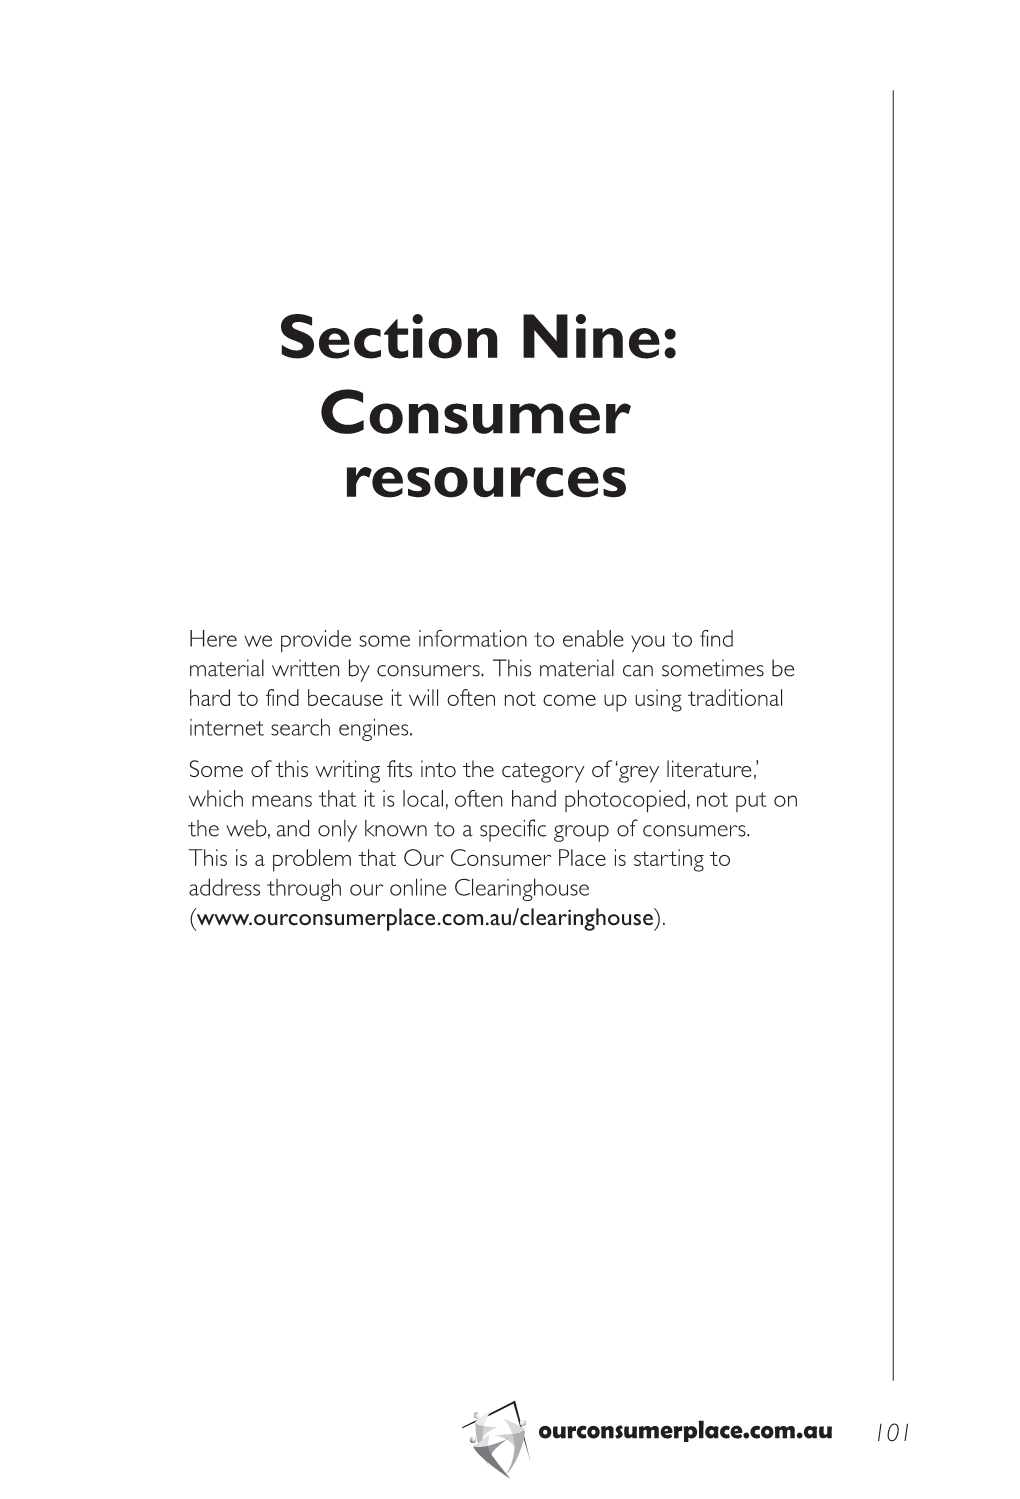 Section Nine: Consumer Resources